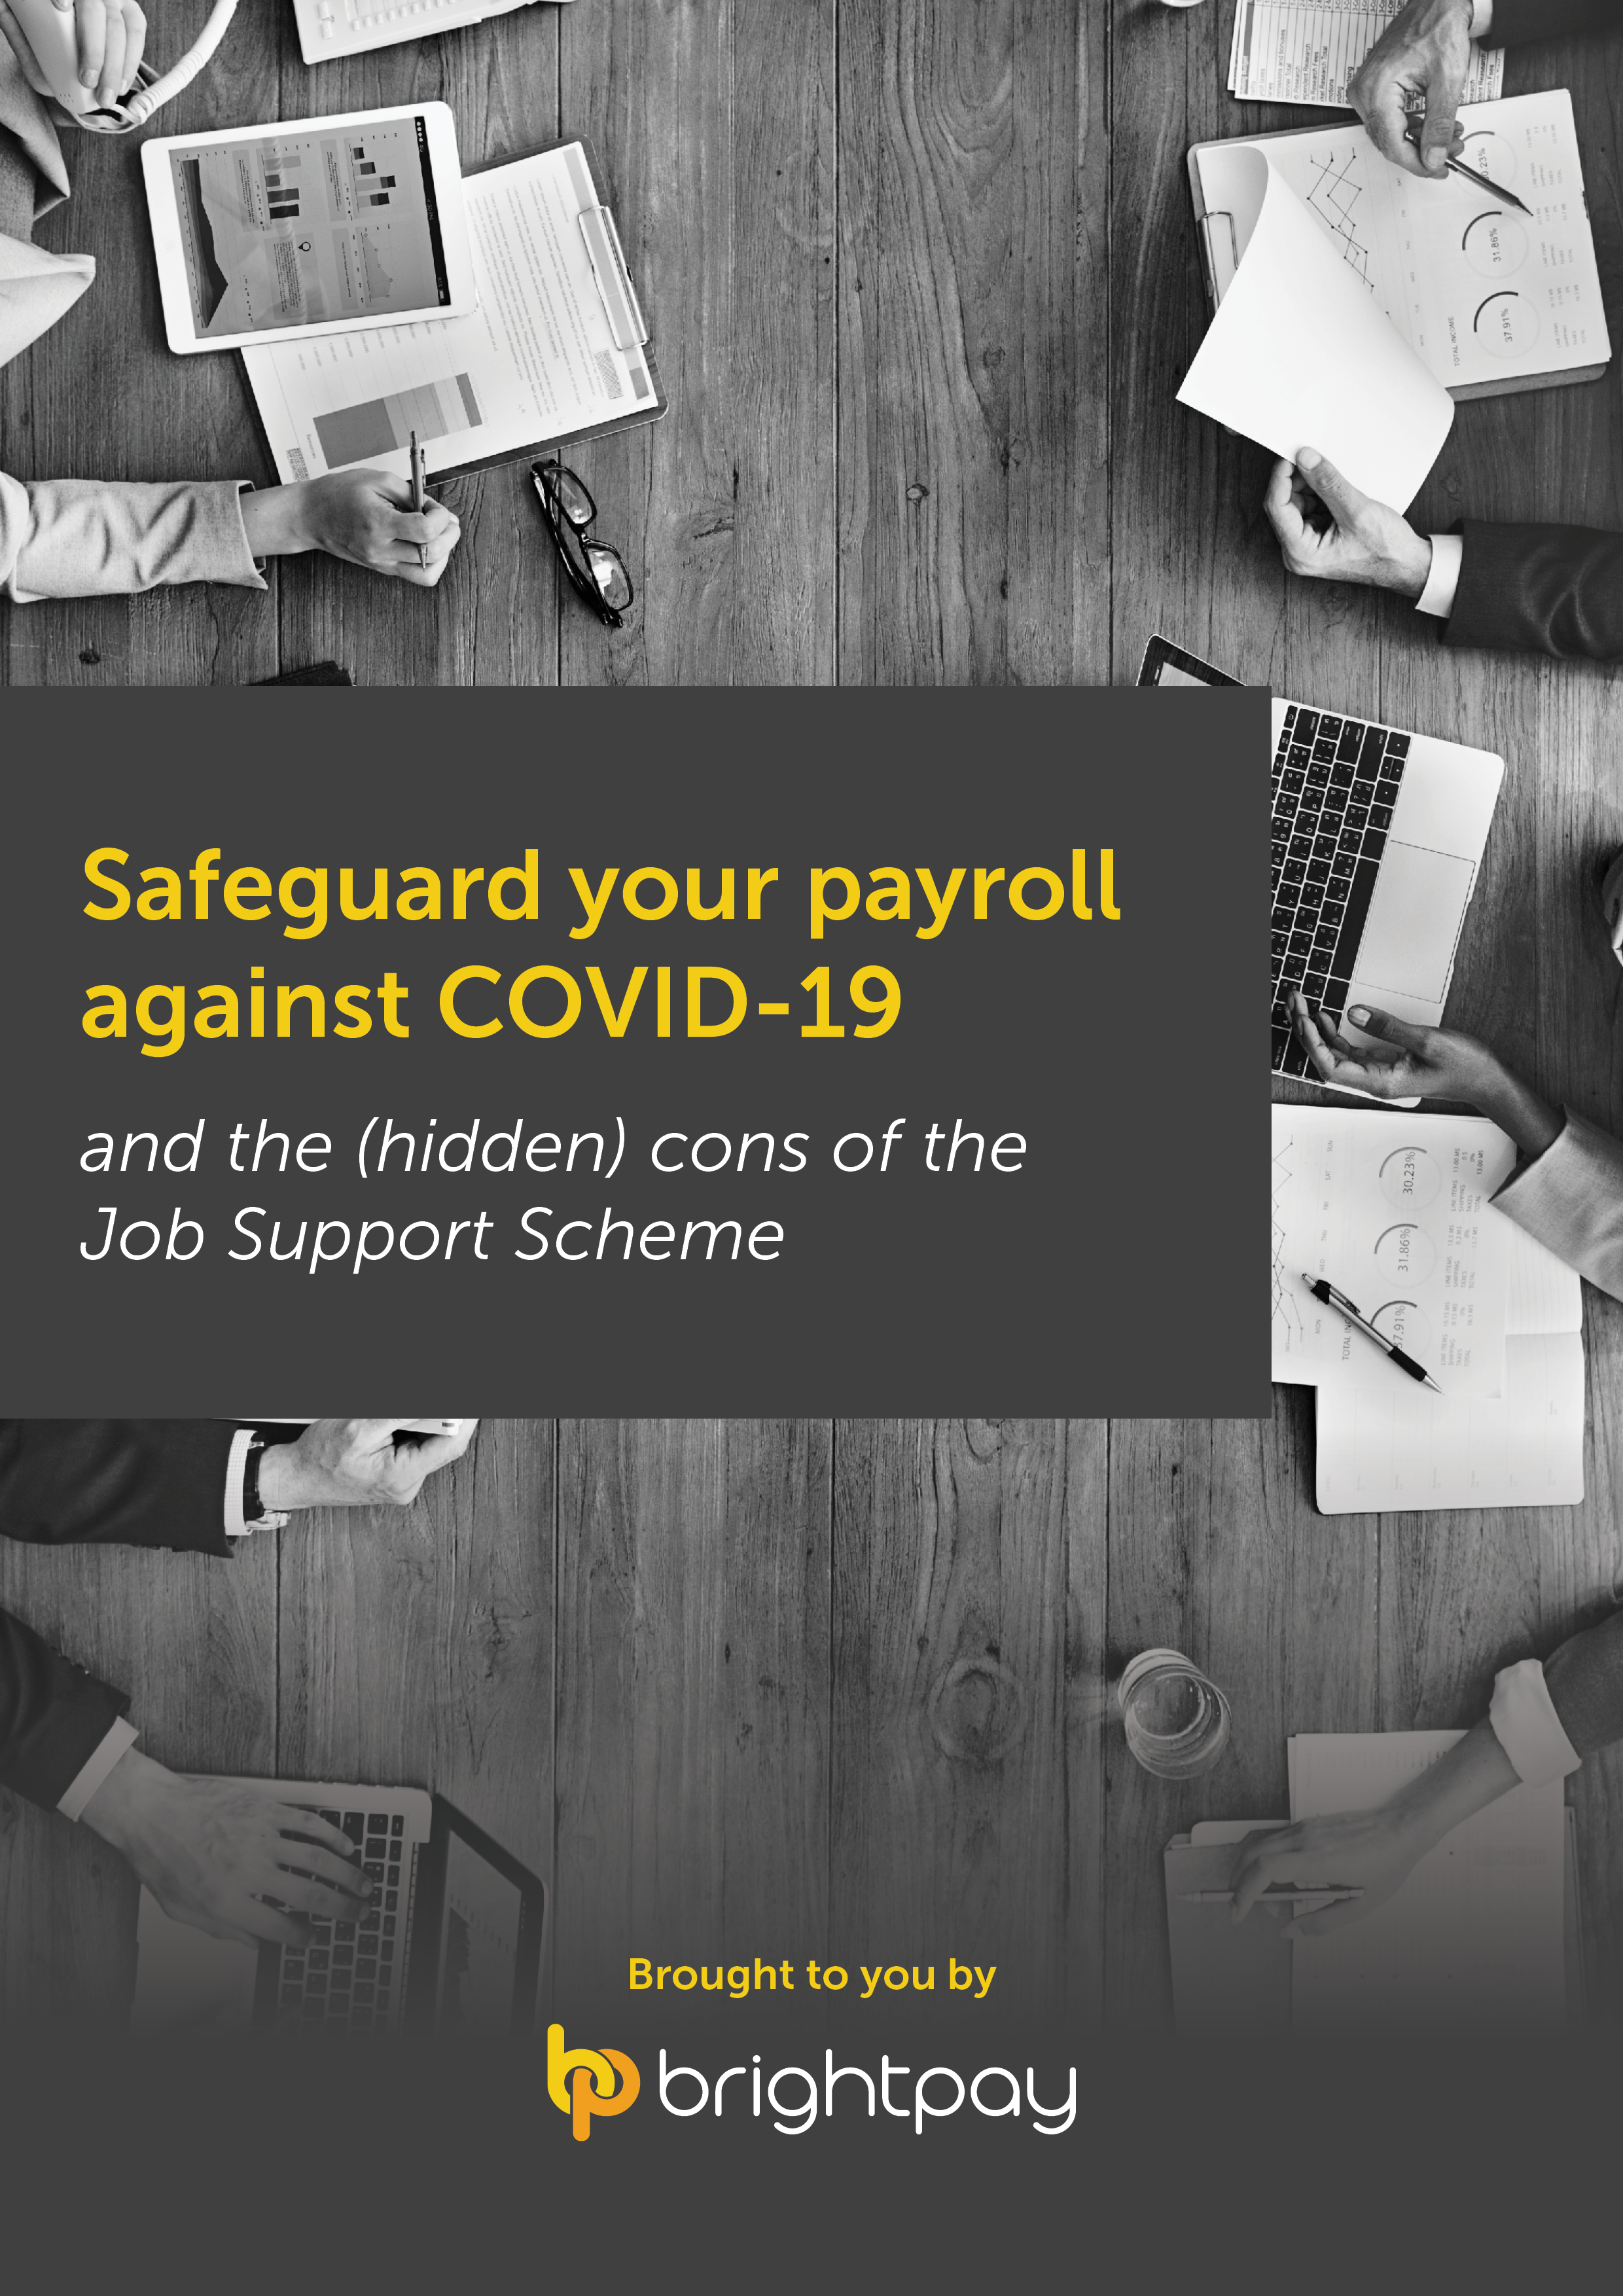 Safeguard your payroll against COVID-19